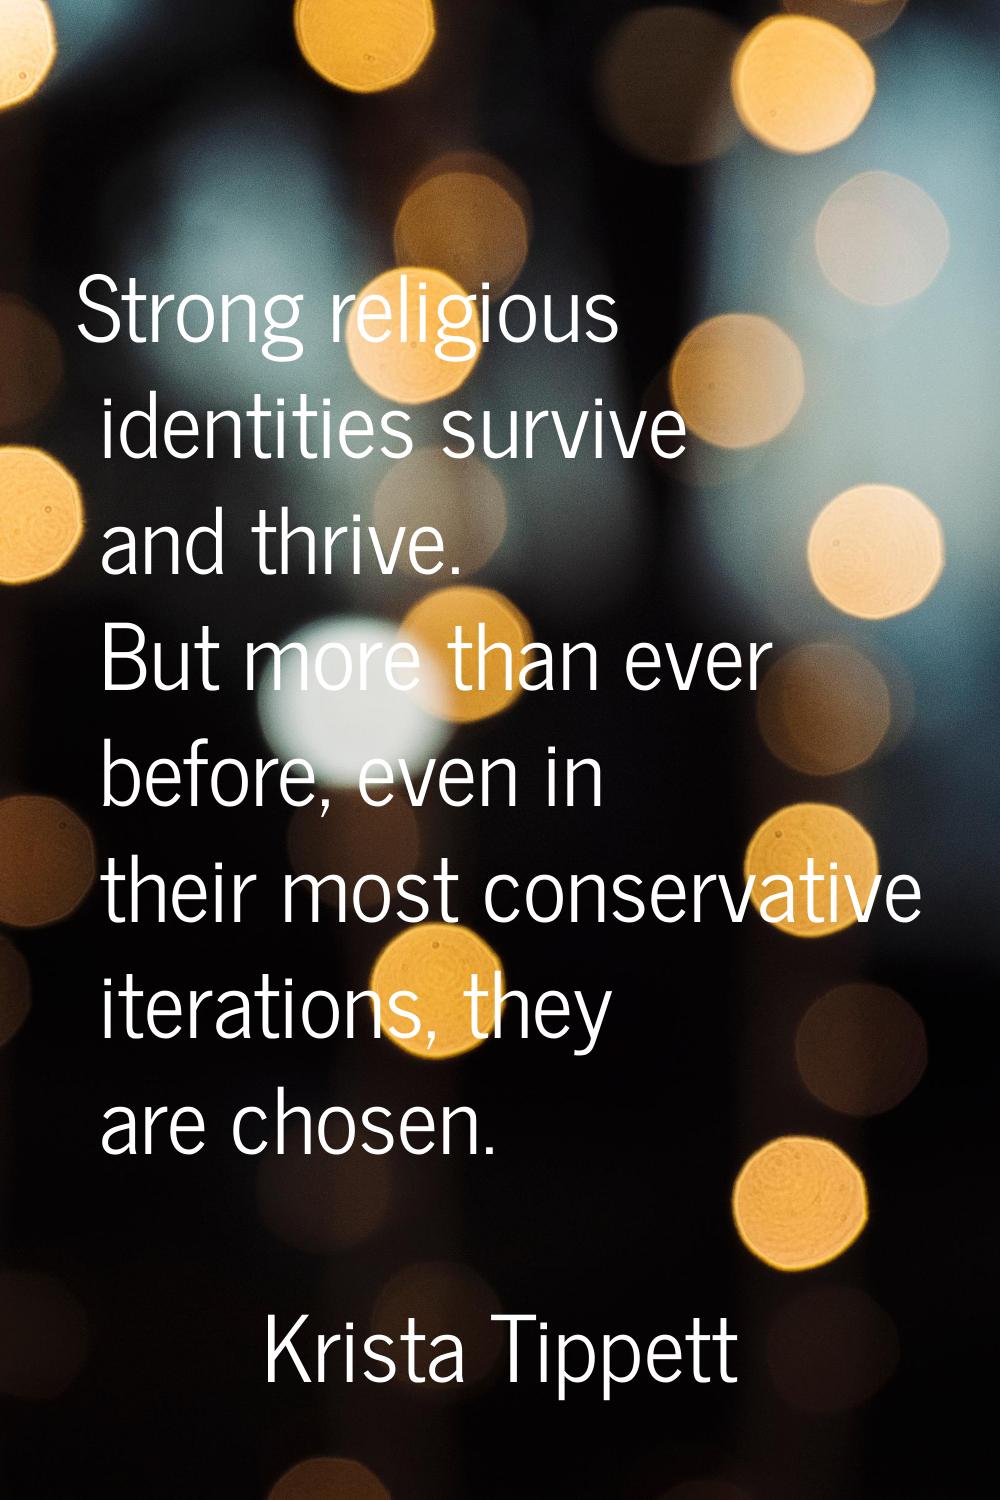 Strong religious identities survive and thrive. But more than ever before, even in their most conse